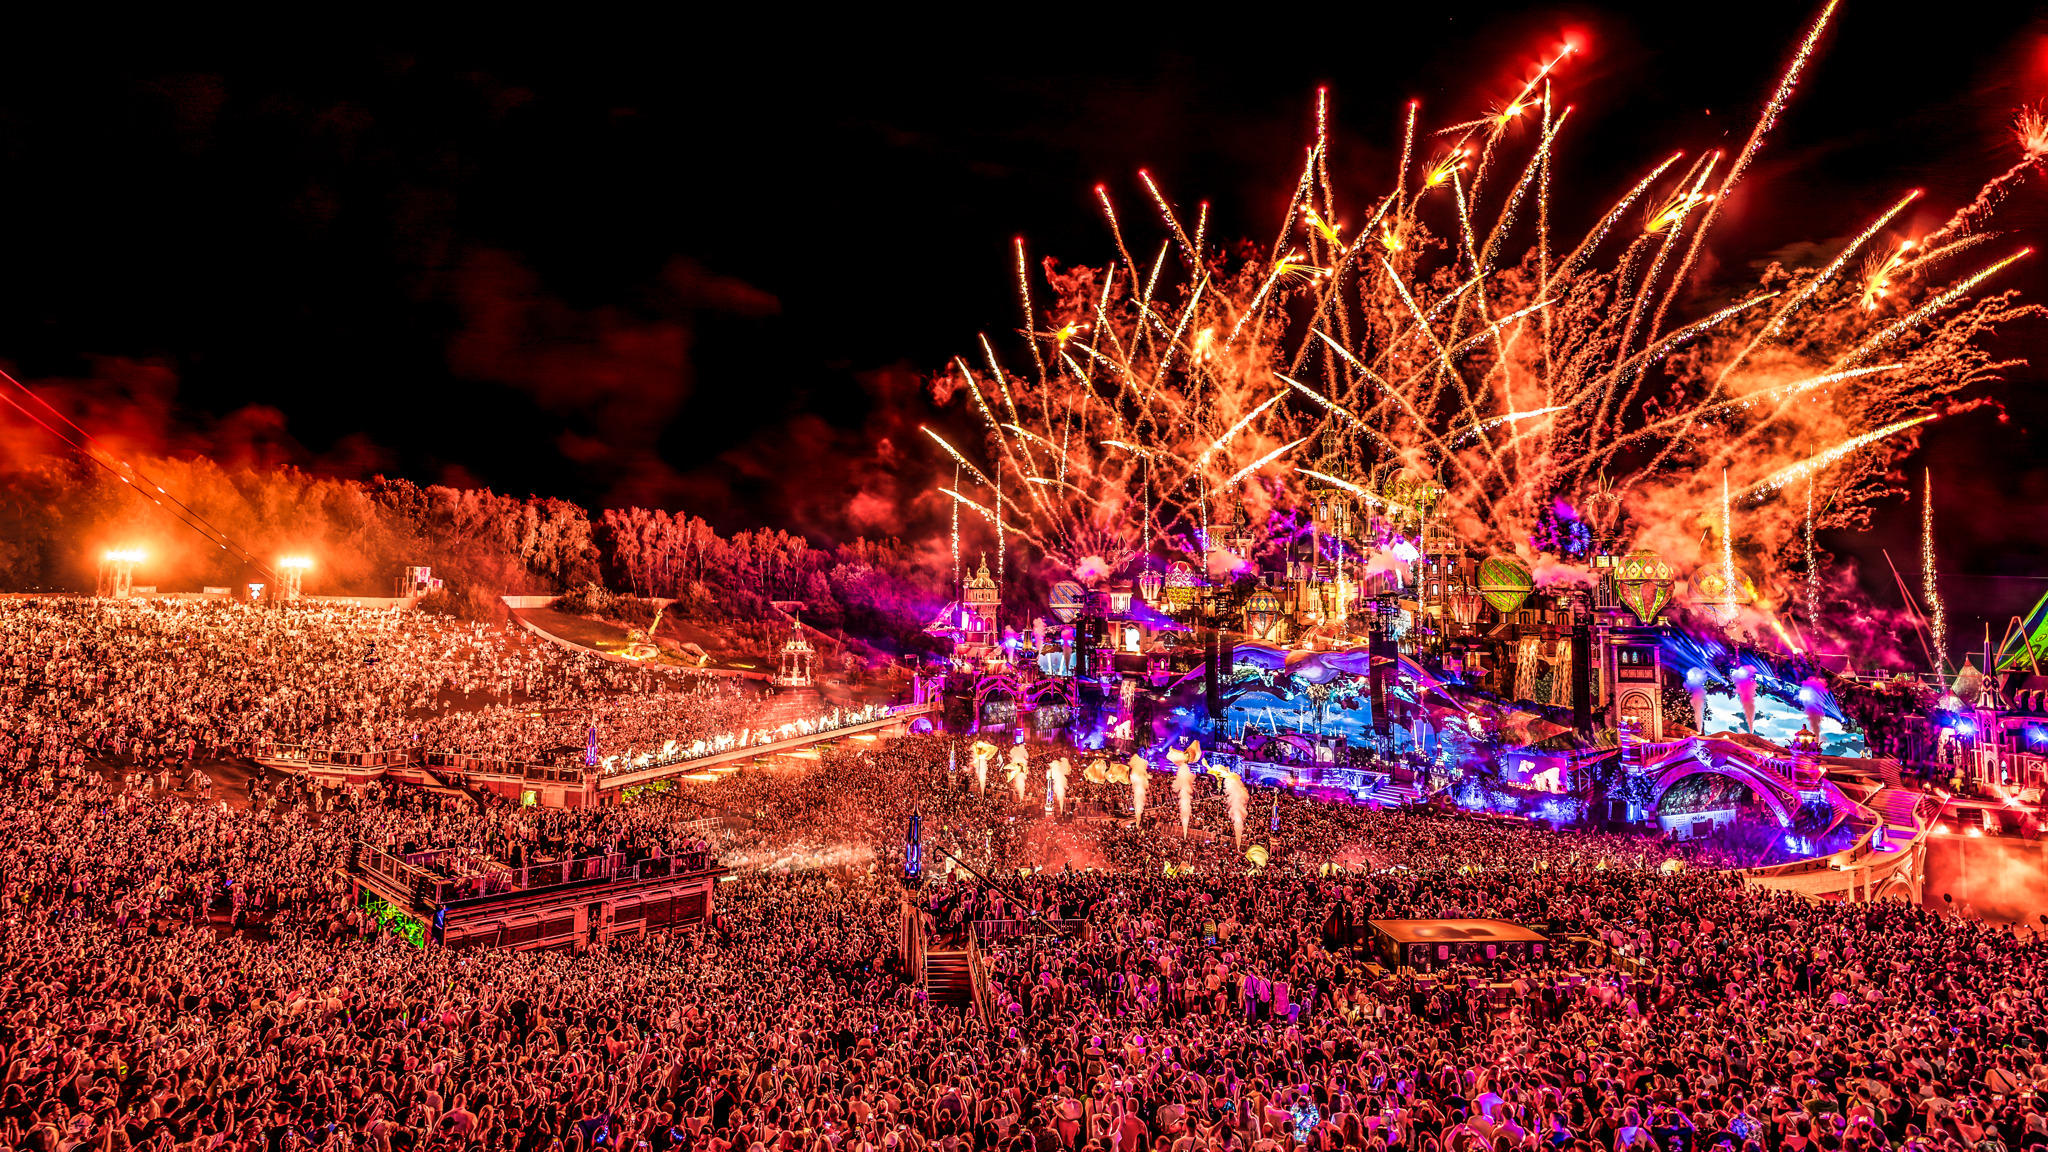 Relive the magic of Tomorrowland